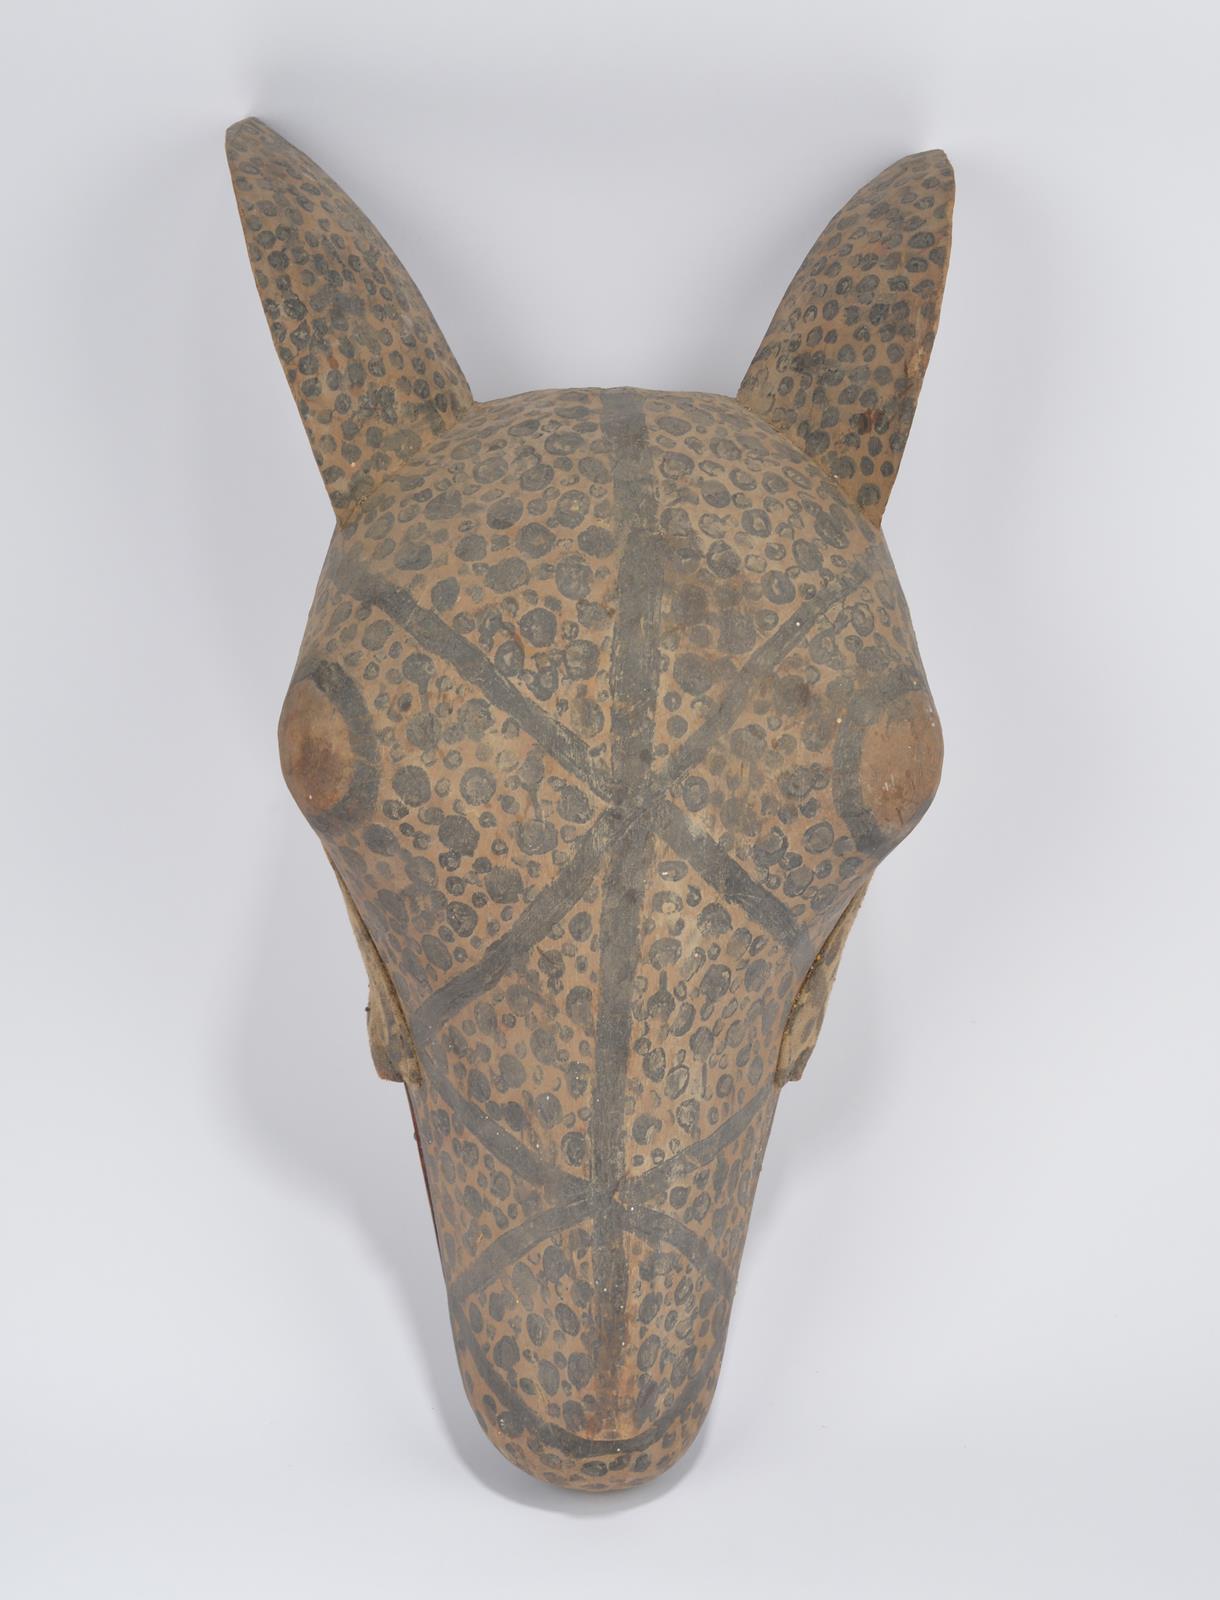 A West African leopard mask probably Cameroon with an articulated jaw, cloth, fibre and painted - Image 2 of 2